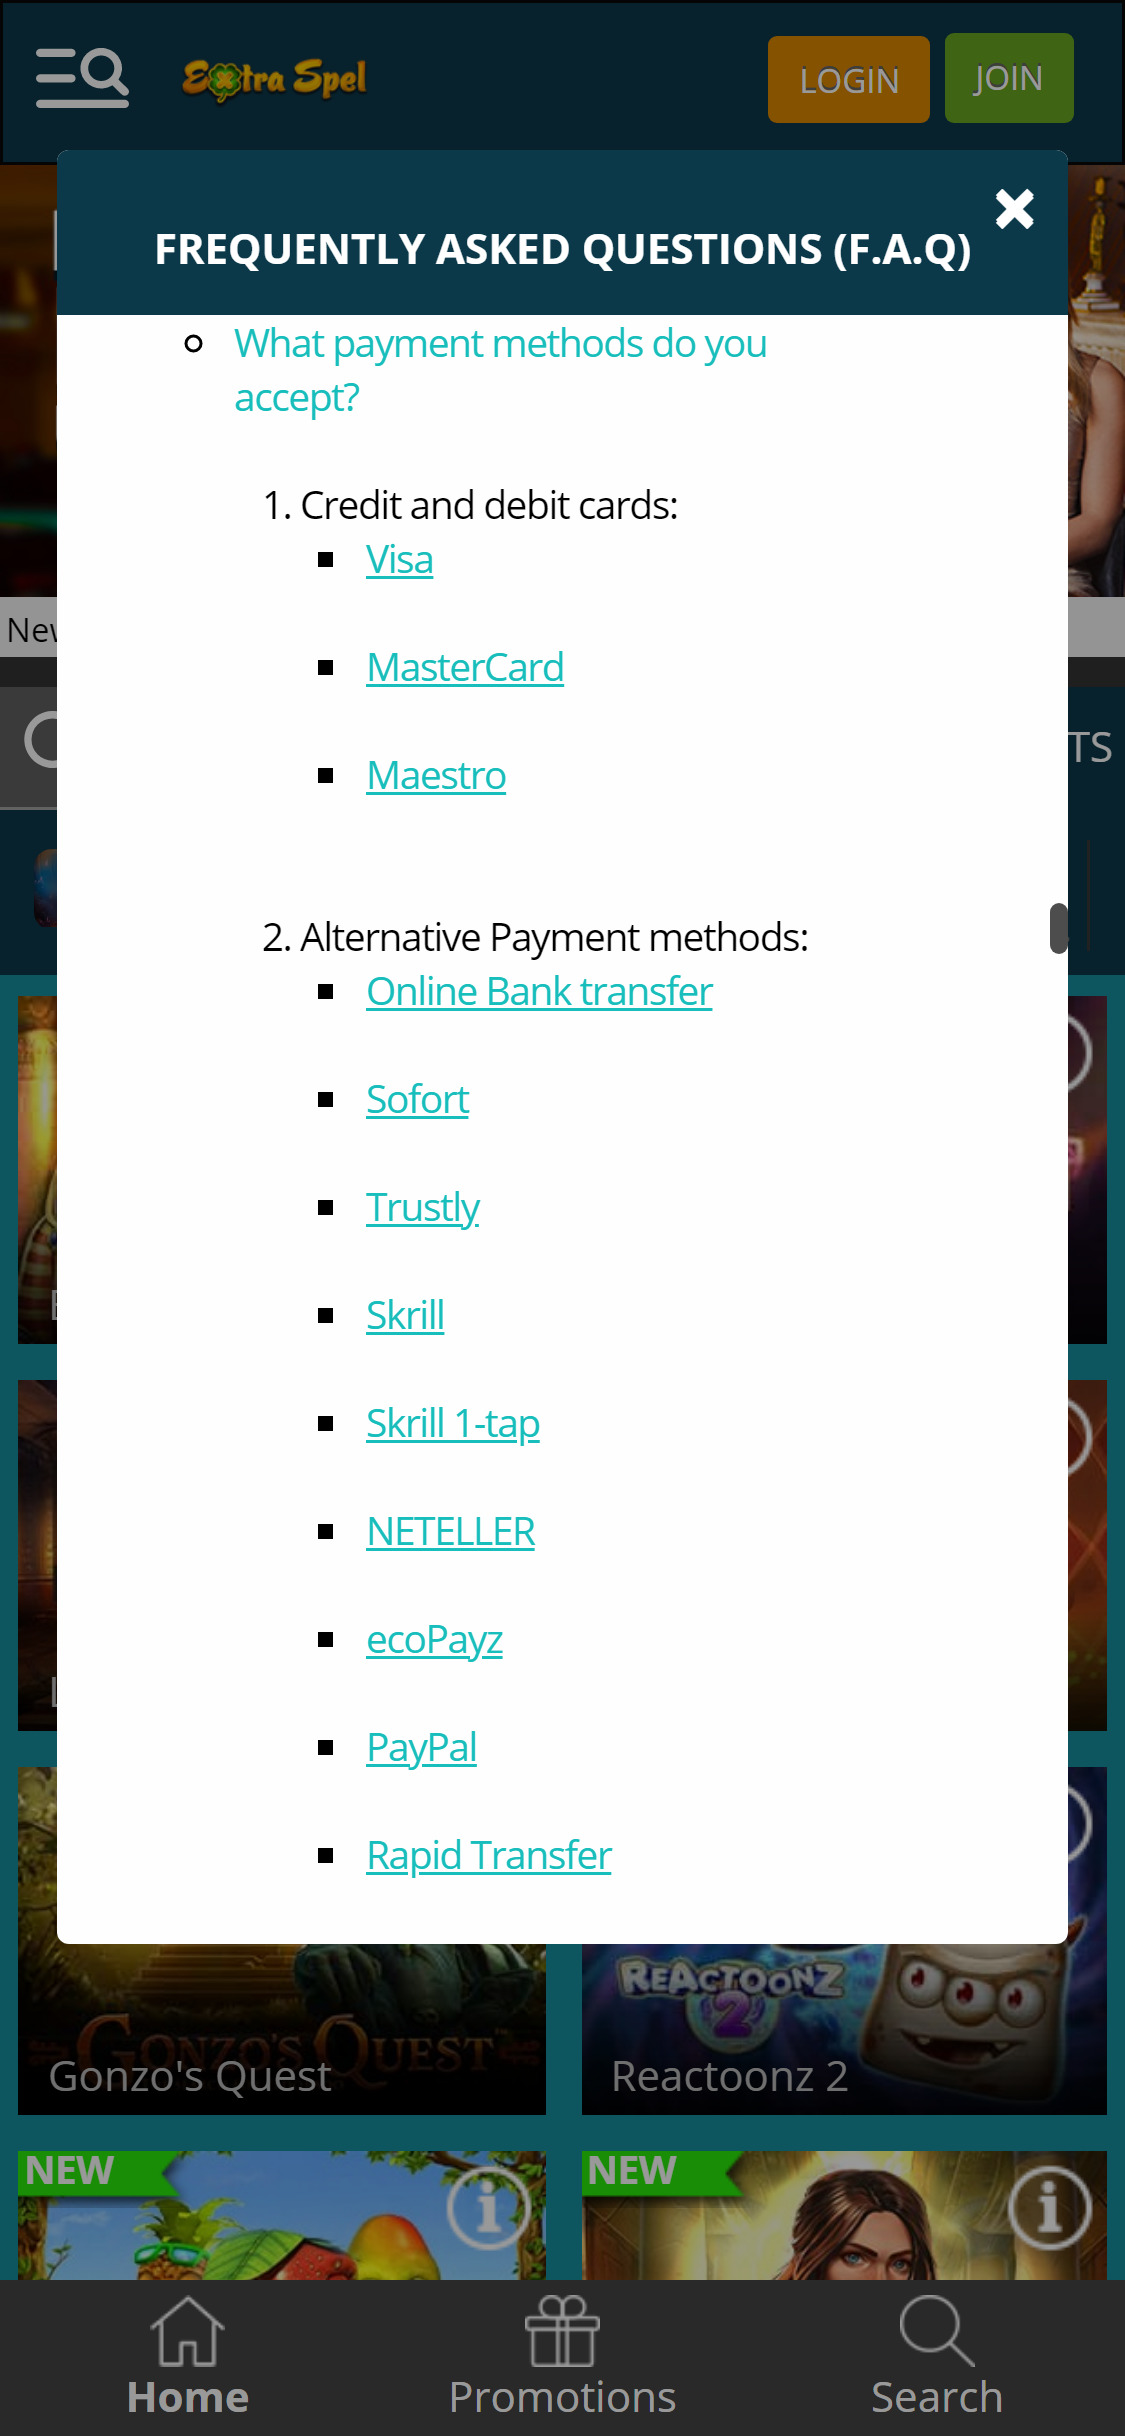 Extra Spel Casino Mobile Payment Methods Review